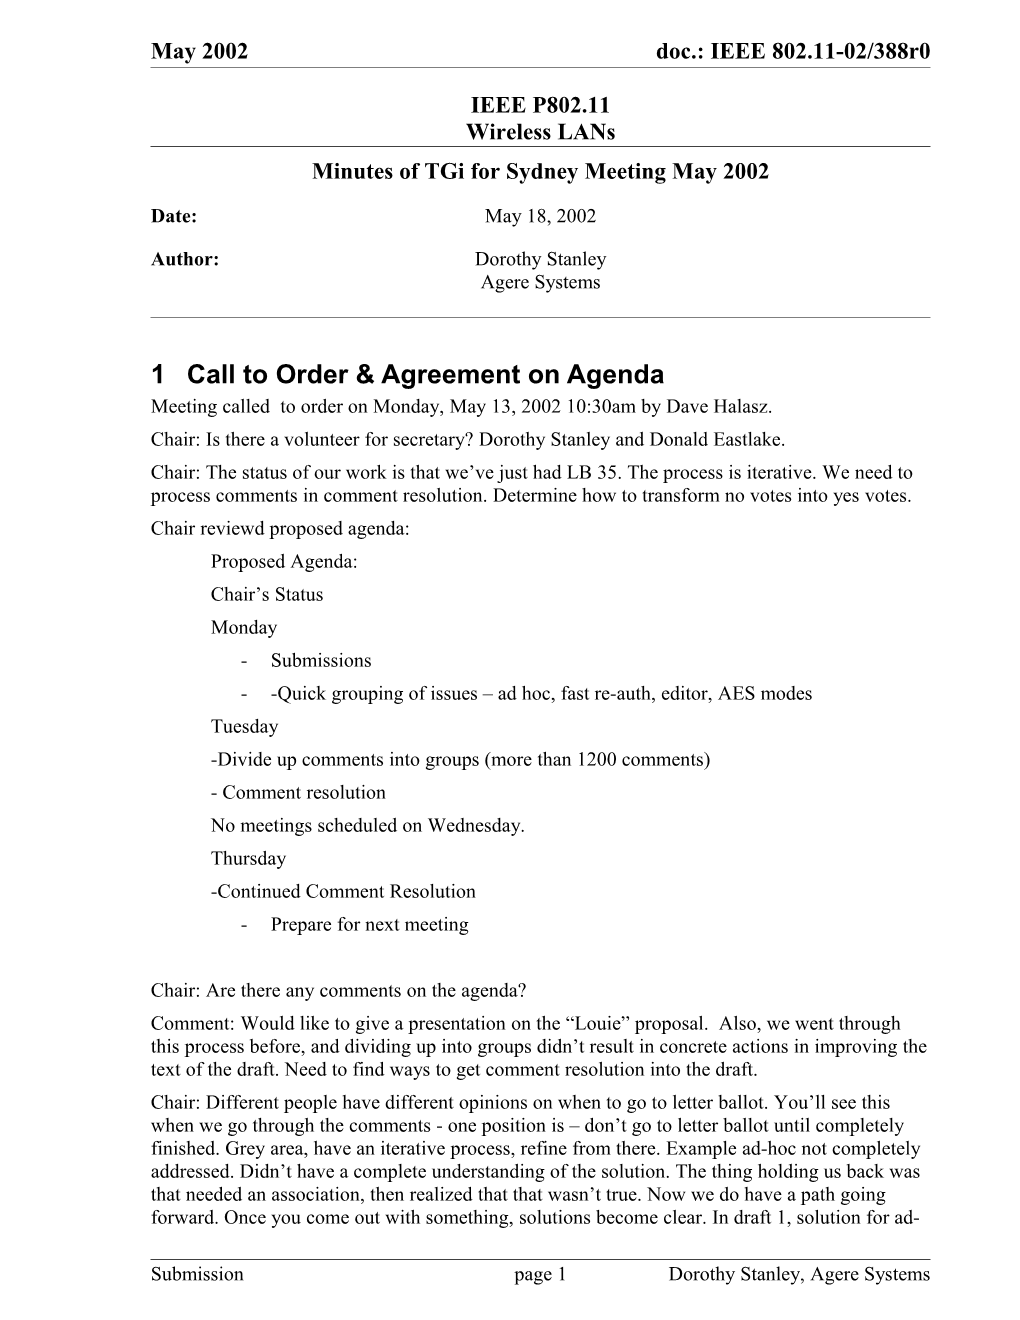 Minutes of Tgi for Sydney Meeting May 2002